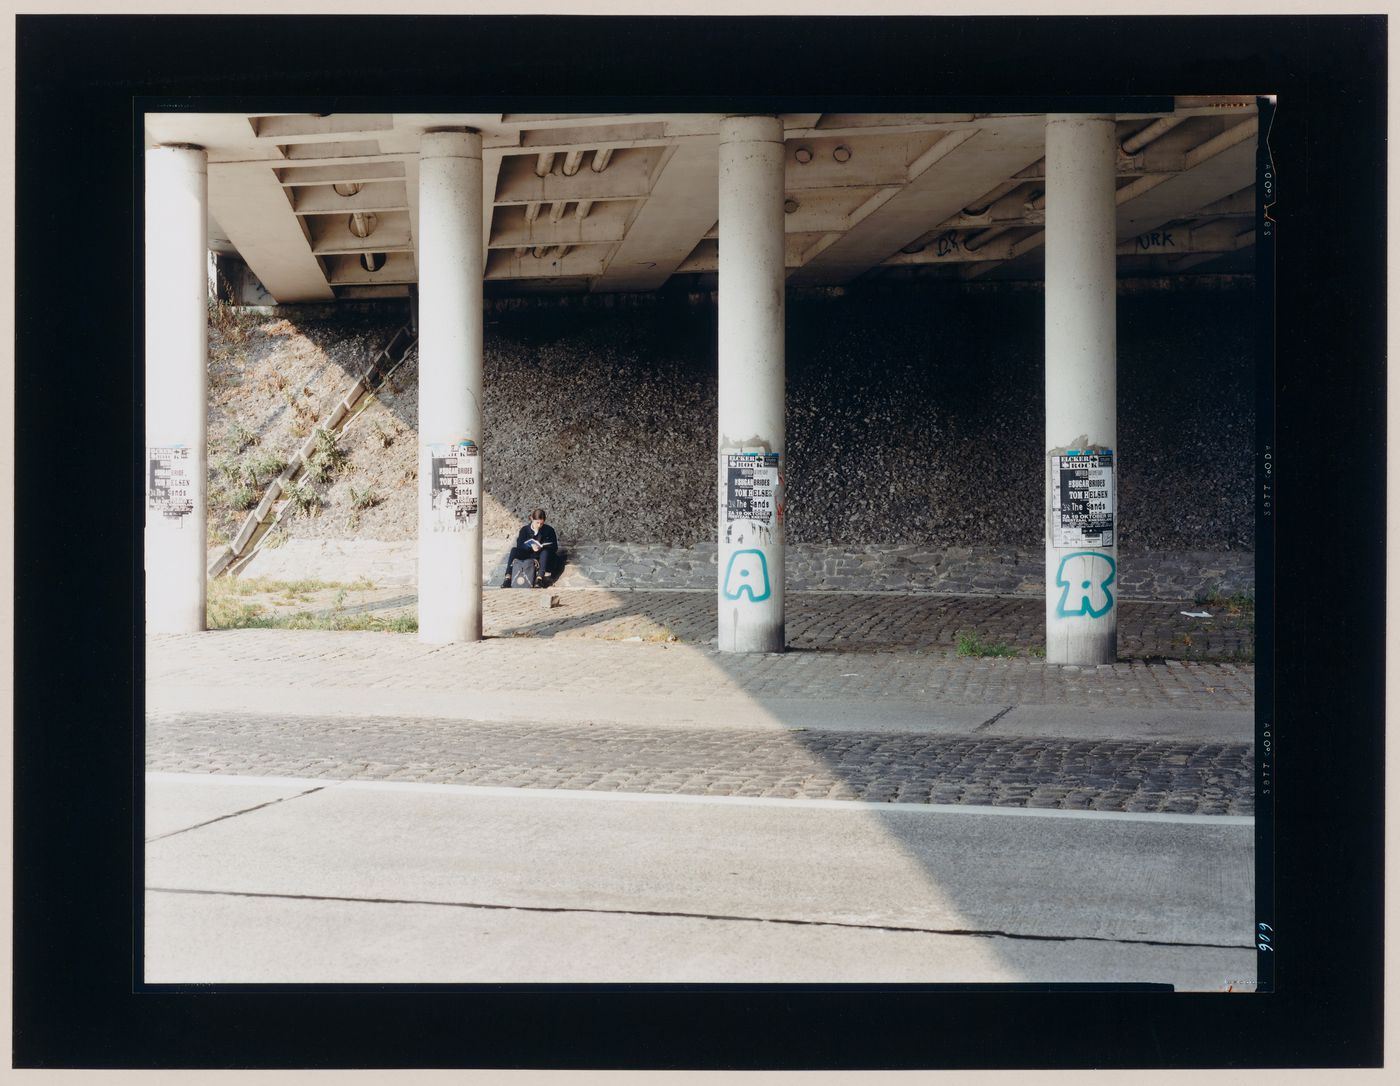 Portrait of a young woman reading showing the roadside under an overpass and columns, Jülich, Germany (from the series "In between cities")